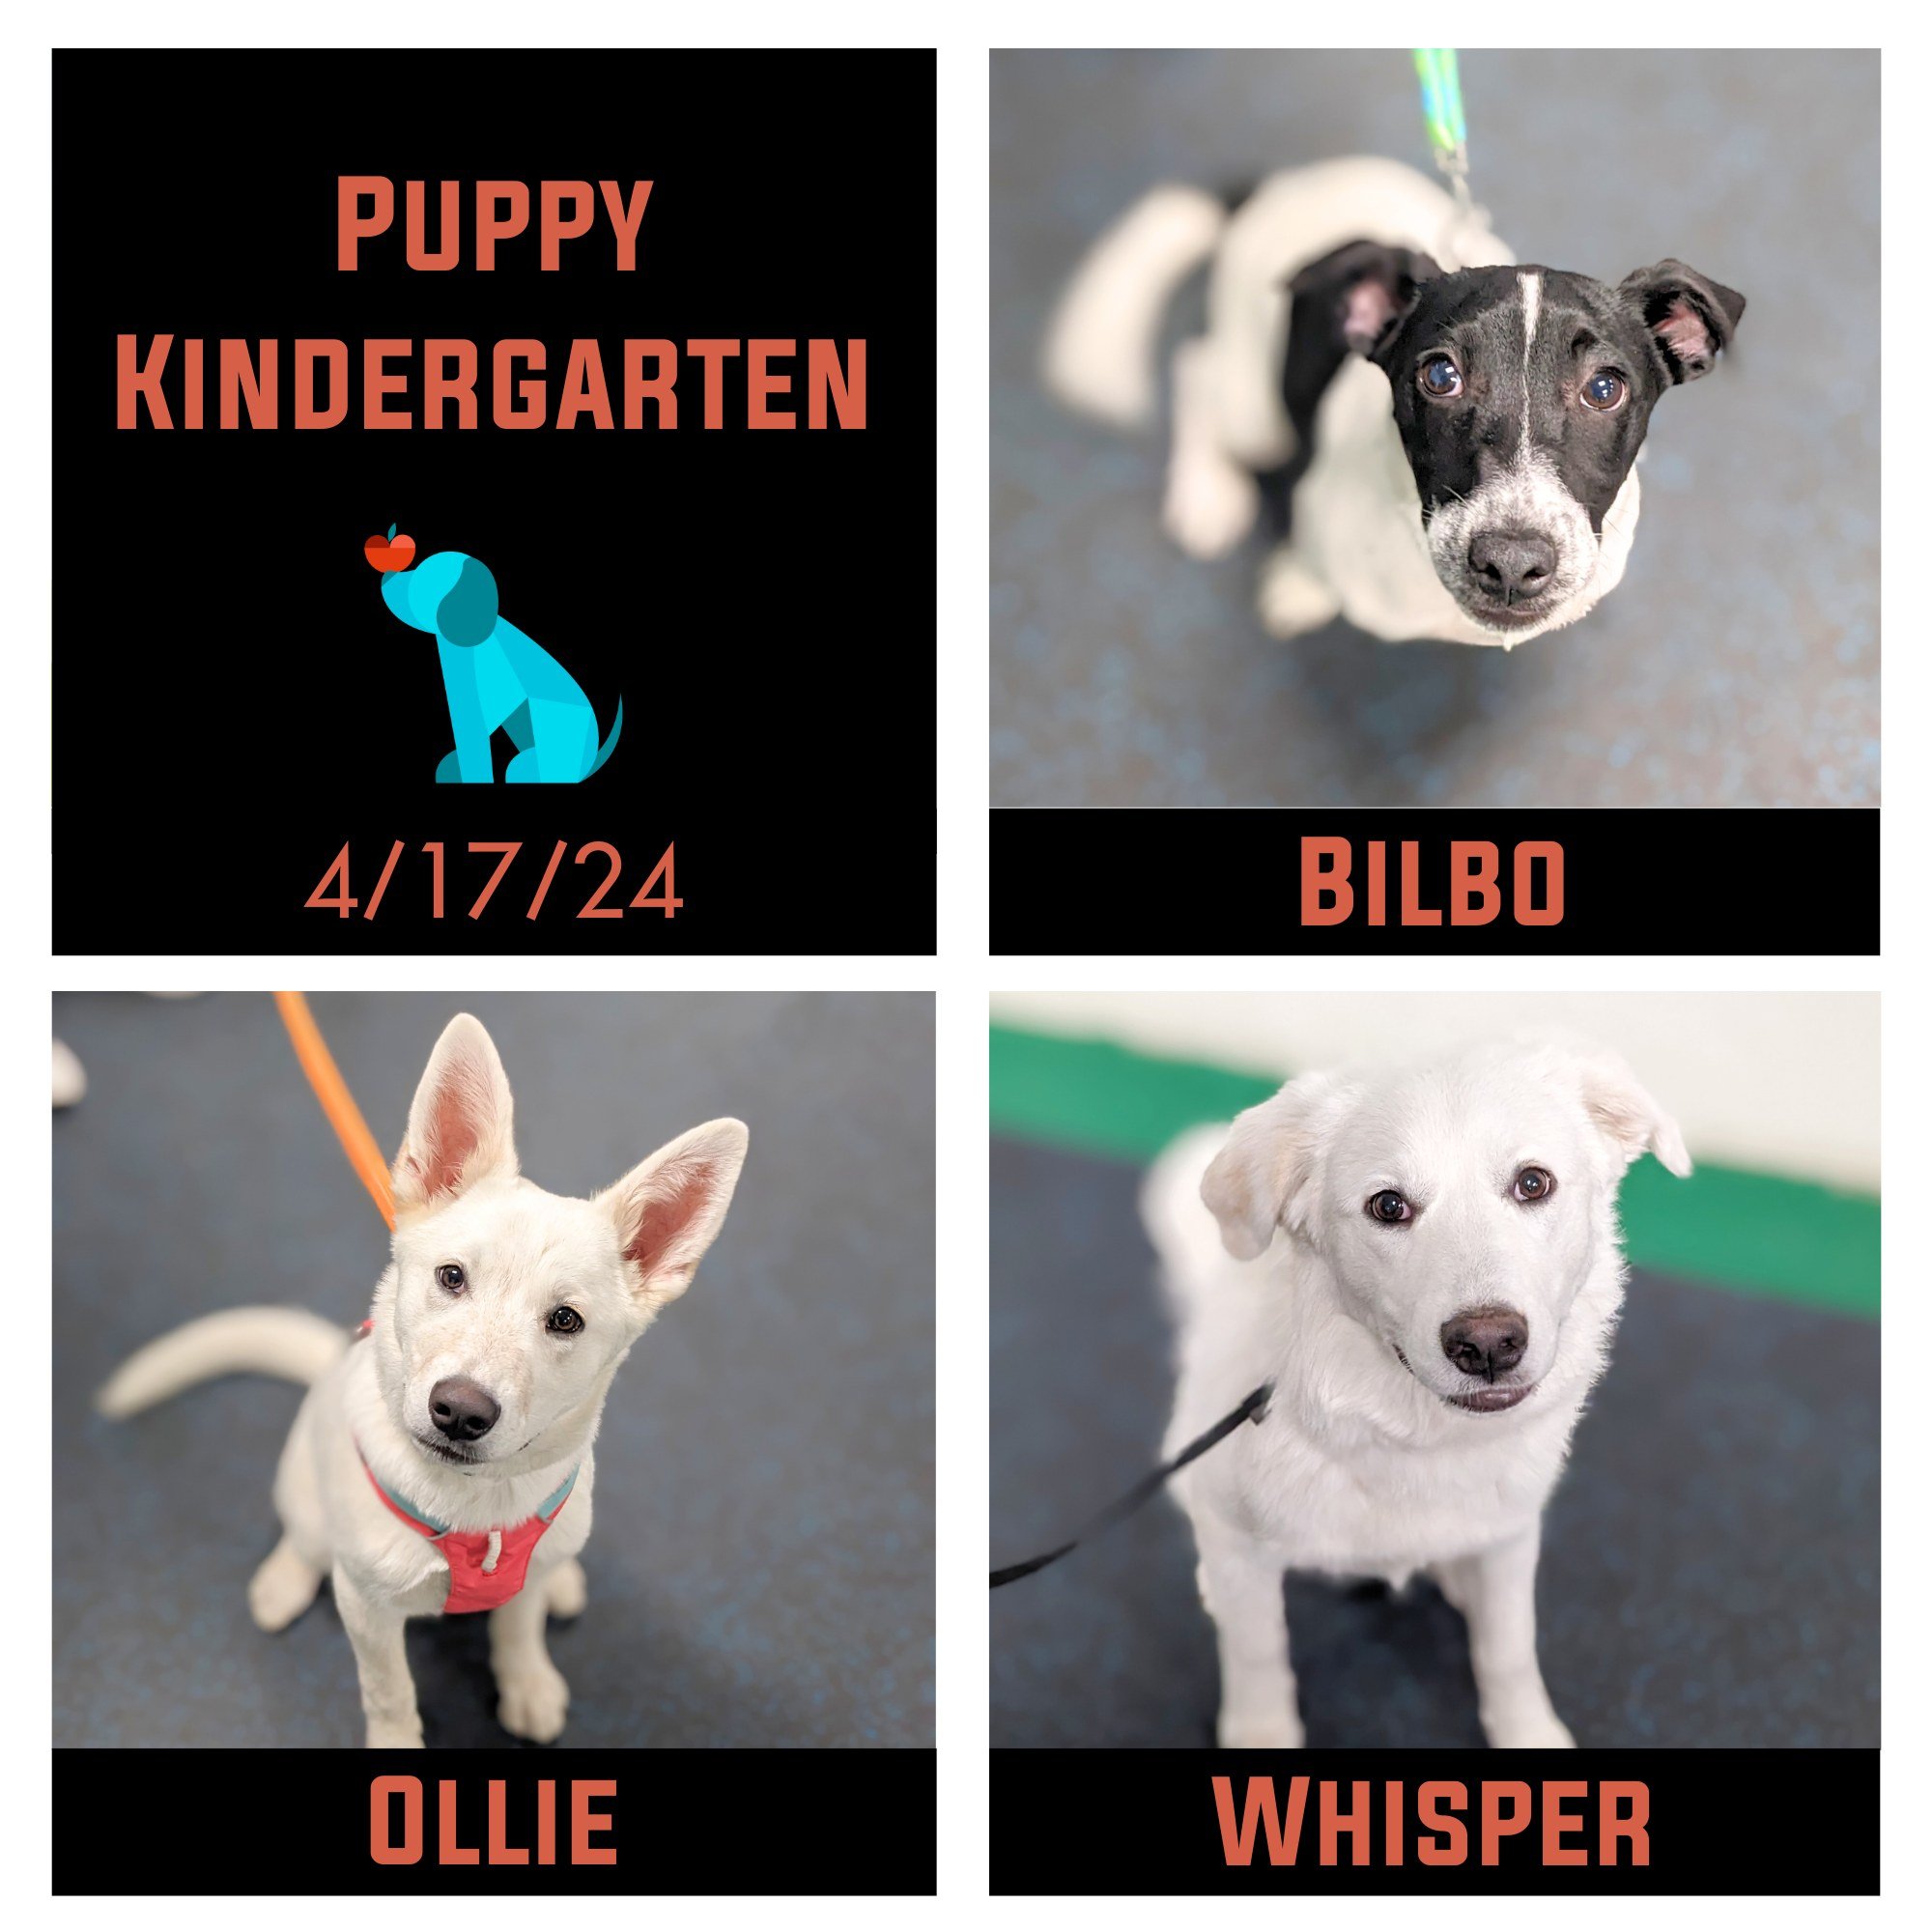 These puppies rocked their cuteness and their learning!  They spent a lot of time practicing different types of socialization with each other, with other people, body handling by their parents and the other puppy parents in class, and with different 